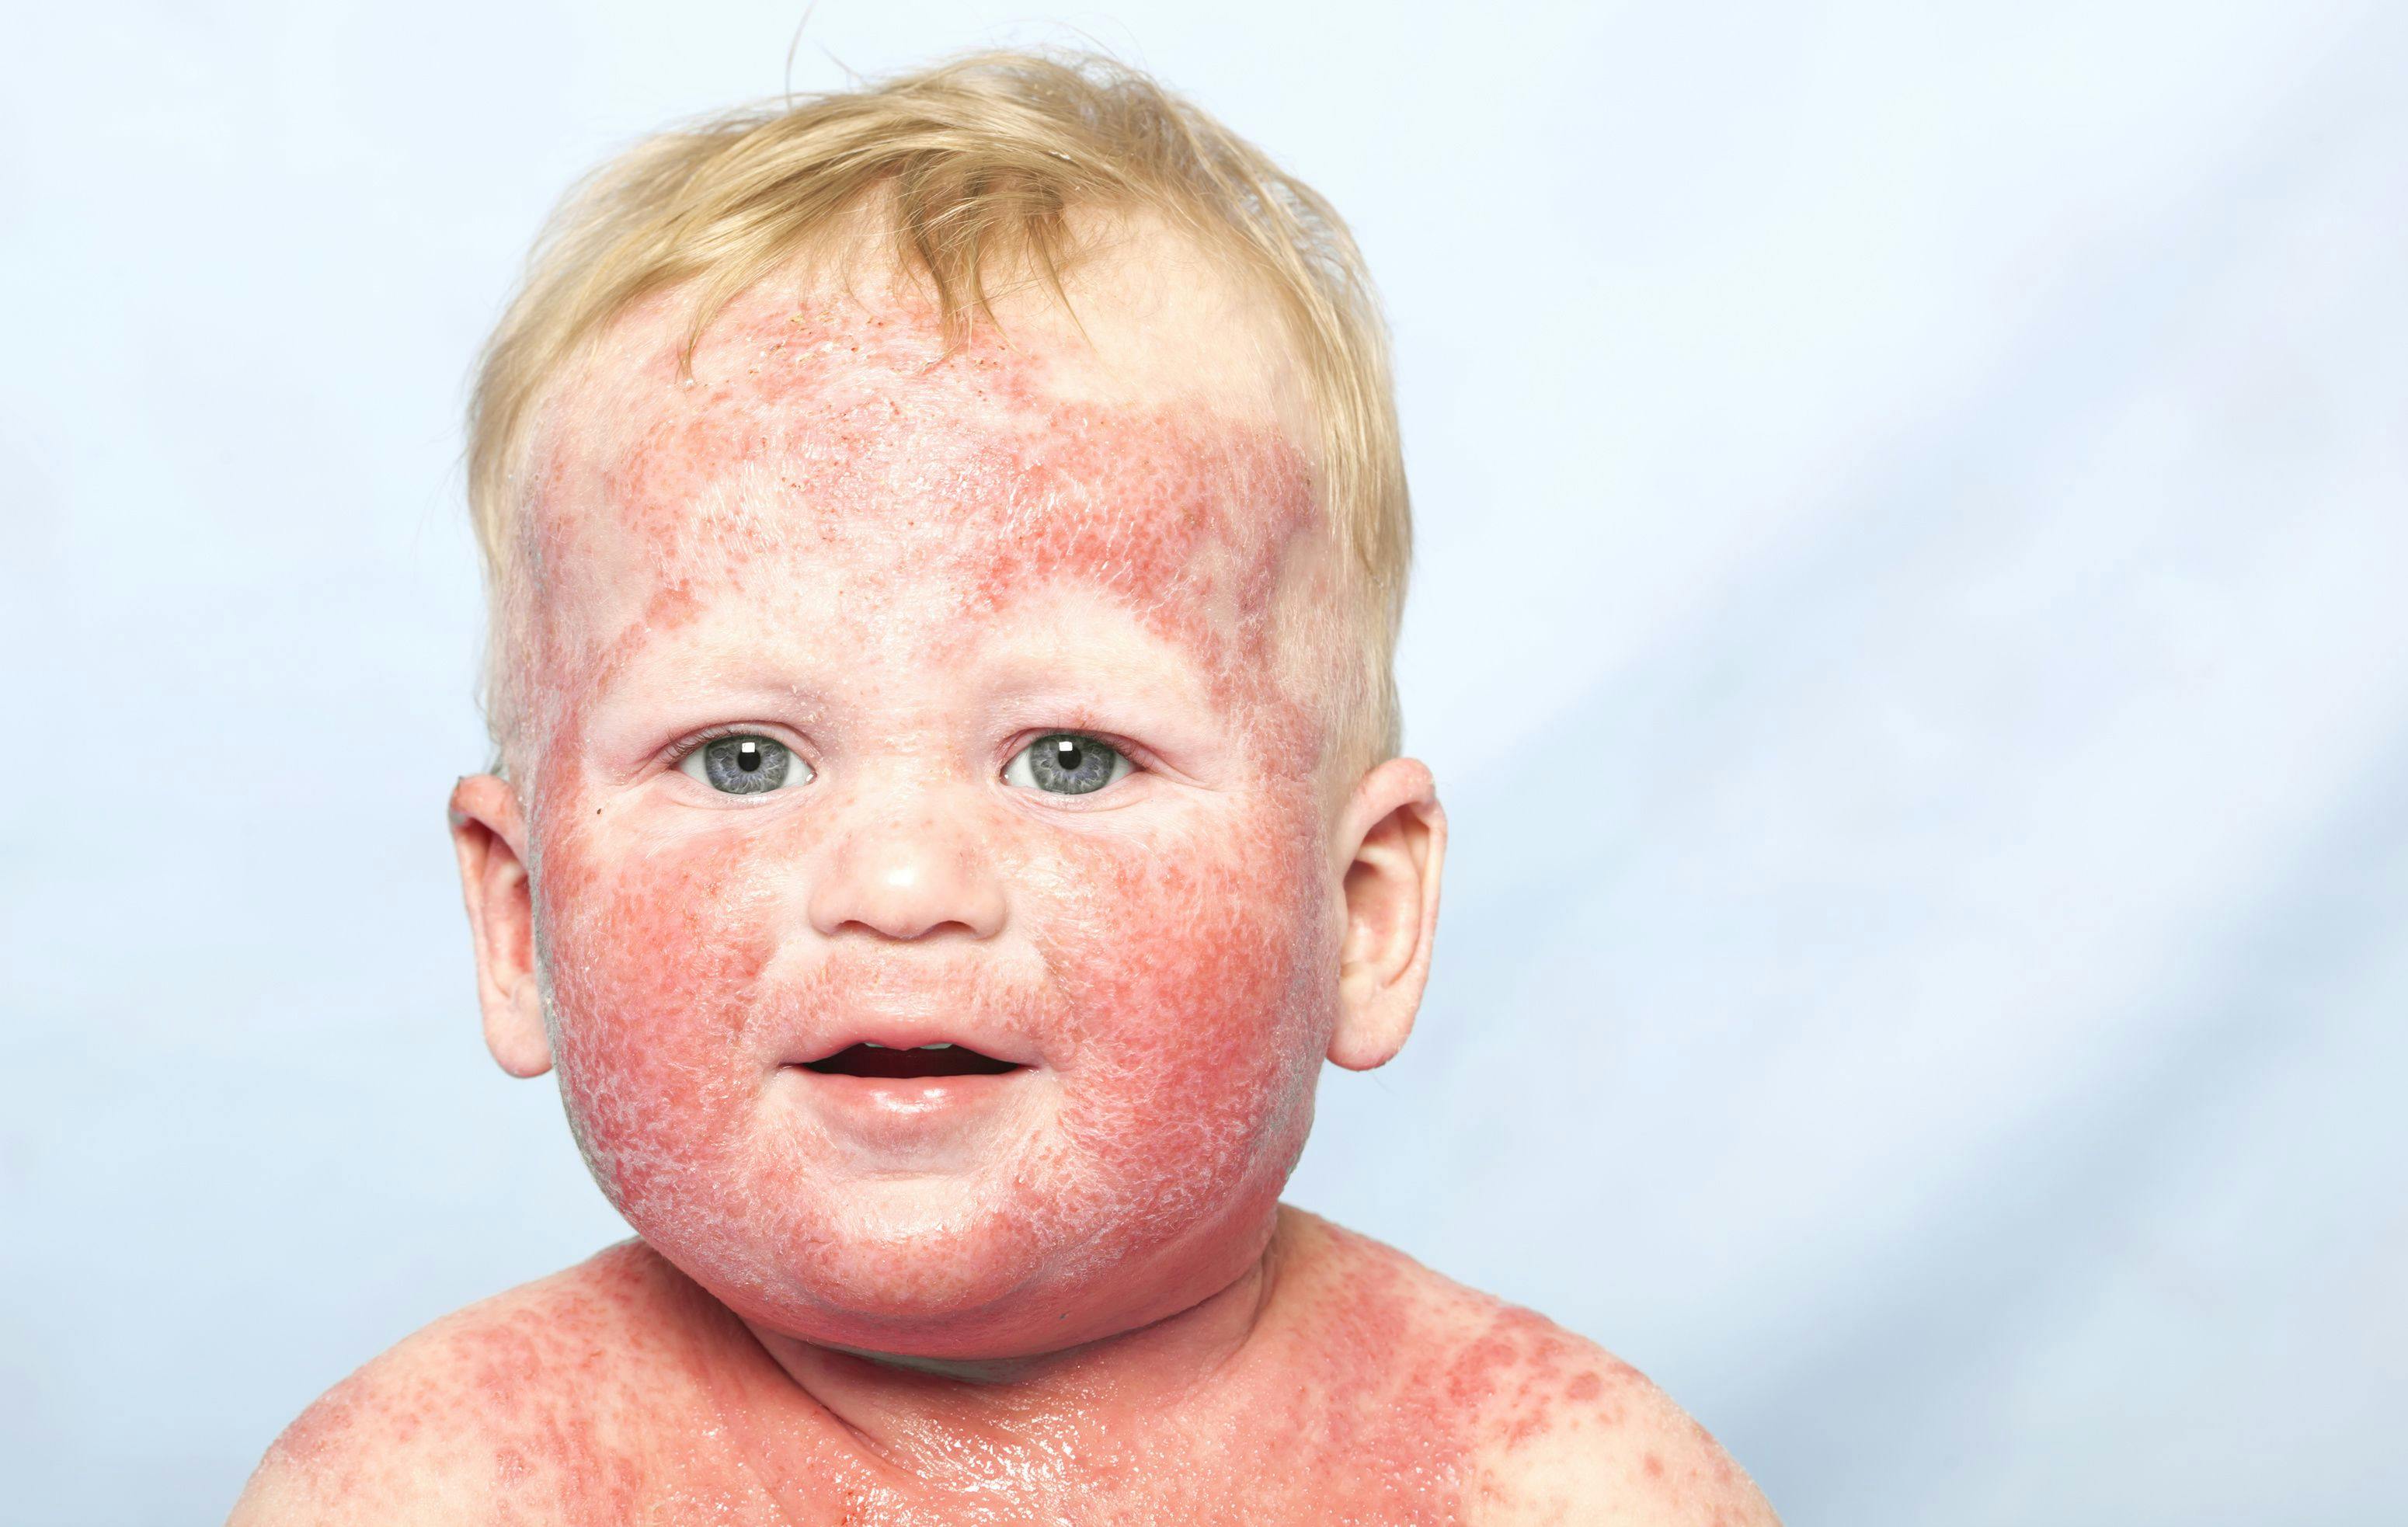 Dupilumab Significantly Reduces Signs, Symptoms of Moderate-to-Severe Atopic Dermatitis in Children 6 Months and Older